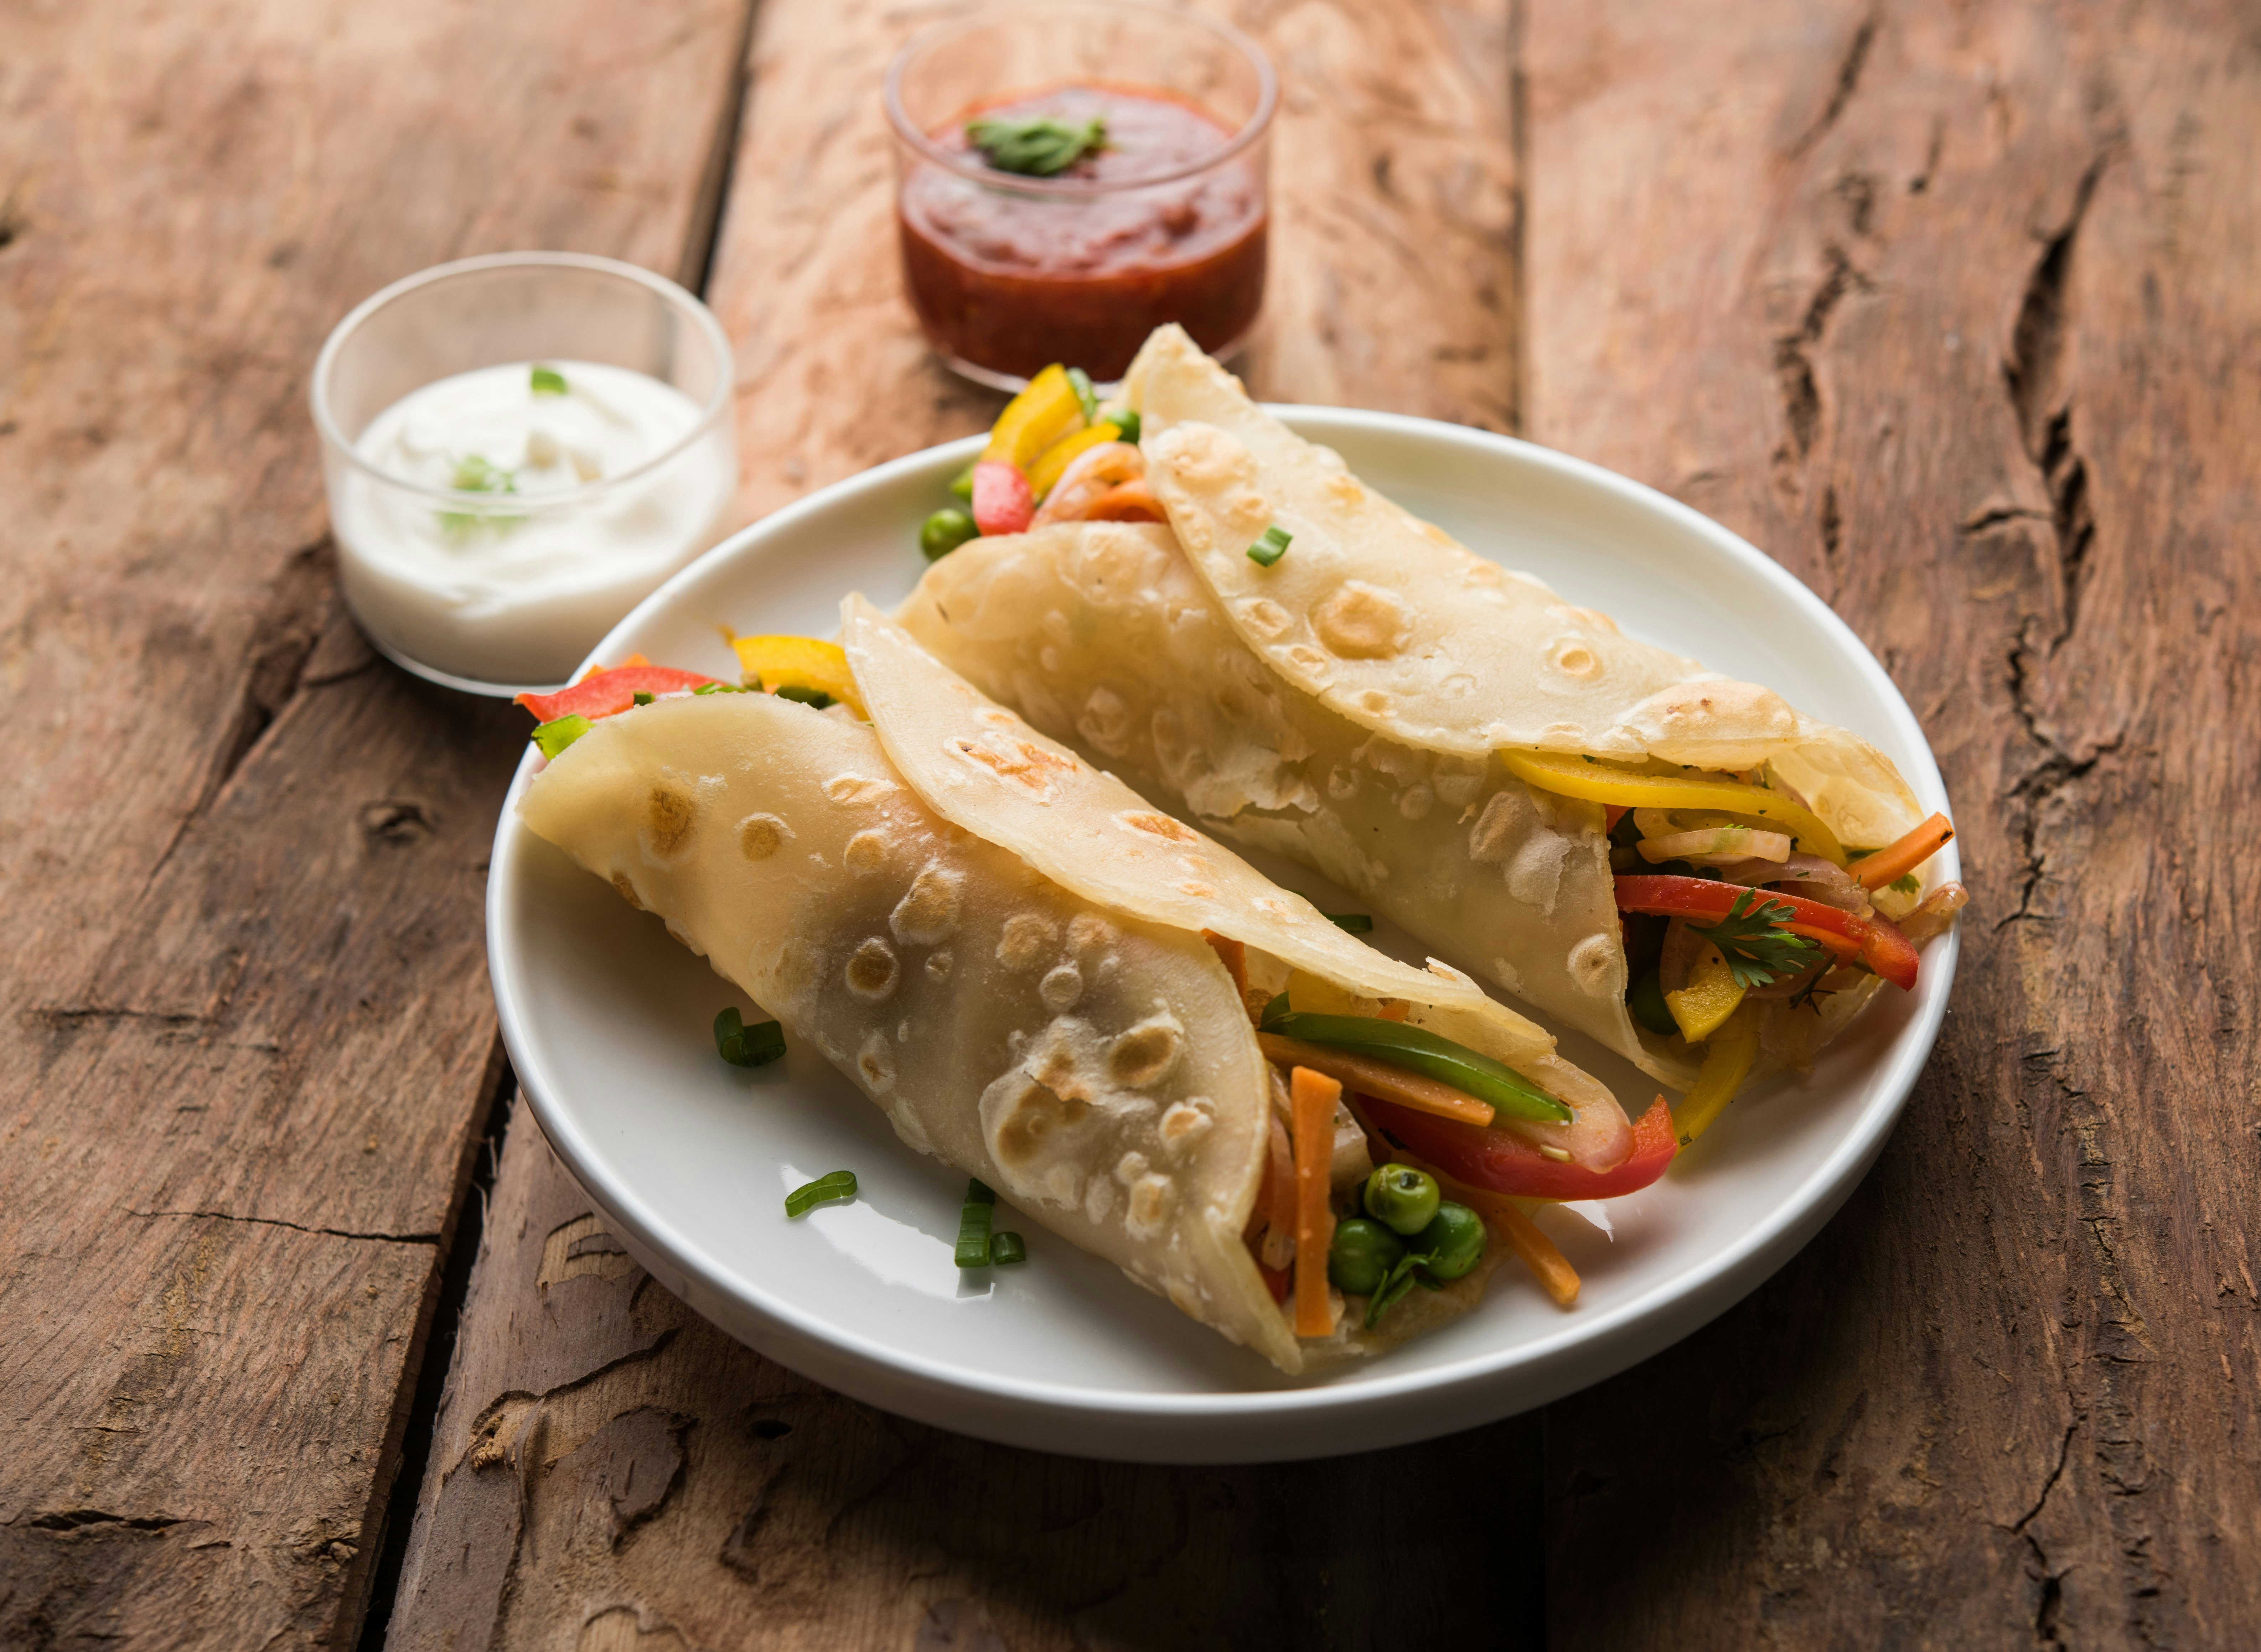 Two kati rolls are displayed on a plate; colourful vegetables are spilling out of the wraps.